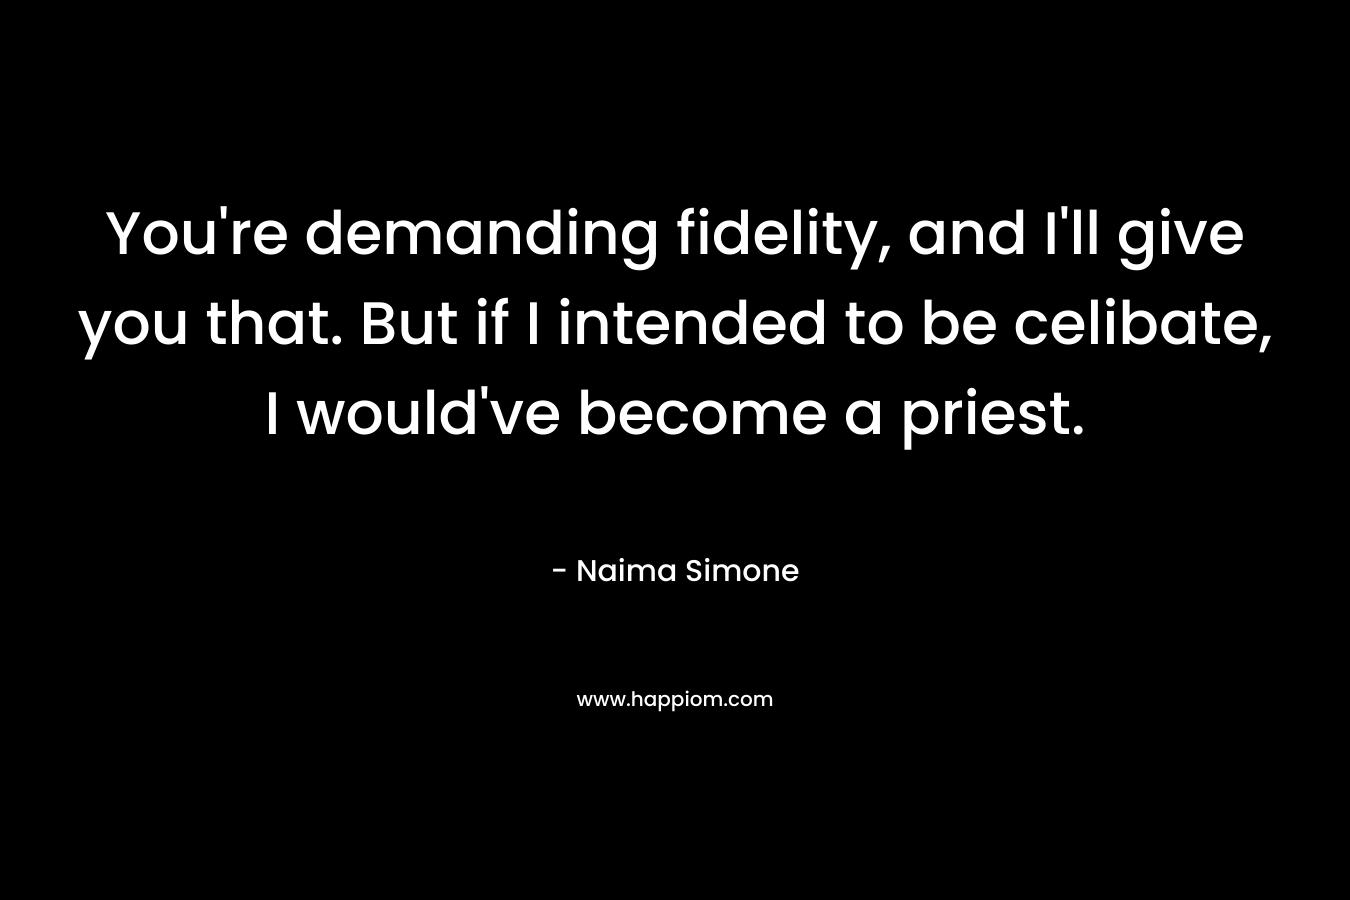 You're demanding fidelity, and I'll give you that. But if I intended to be celibate, I would've become a priest.